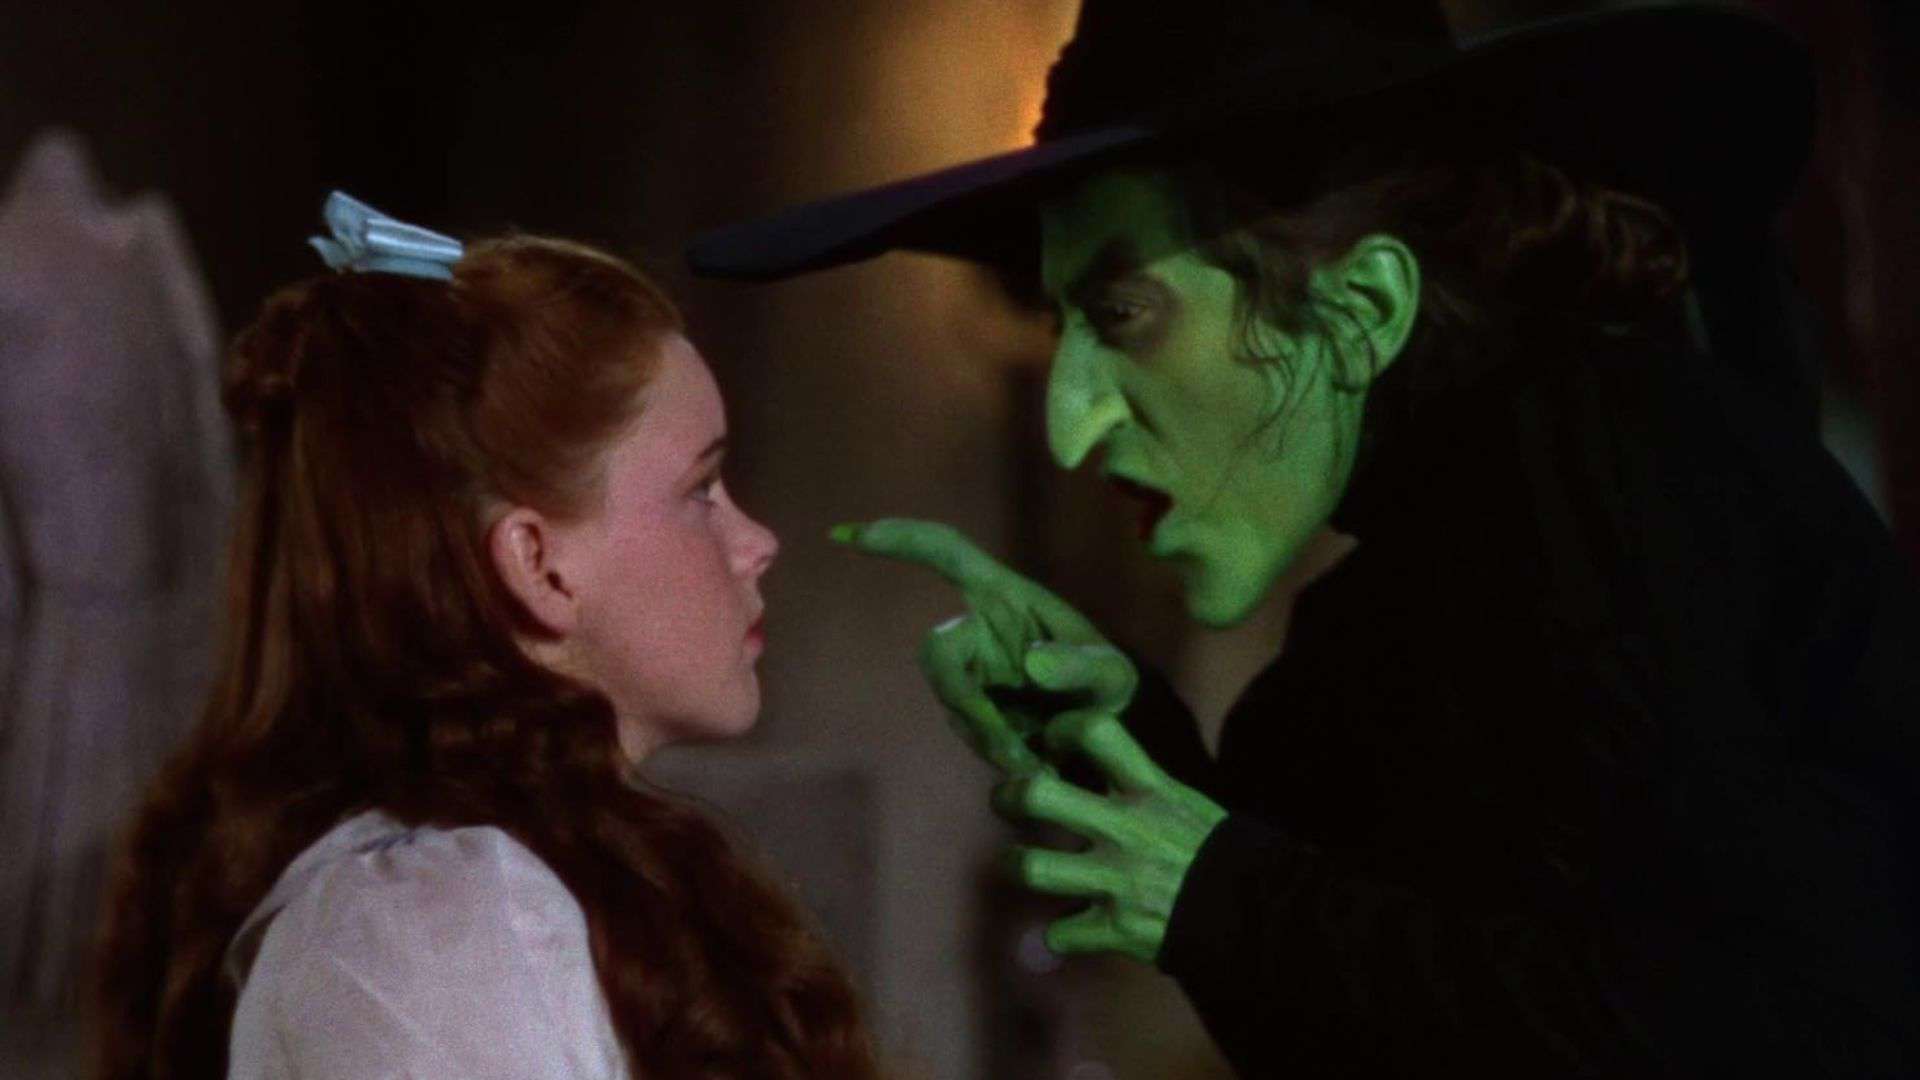 A wicked green witch threatens a young girl in this image from Metro-Goldwyn-Mayer.